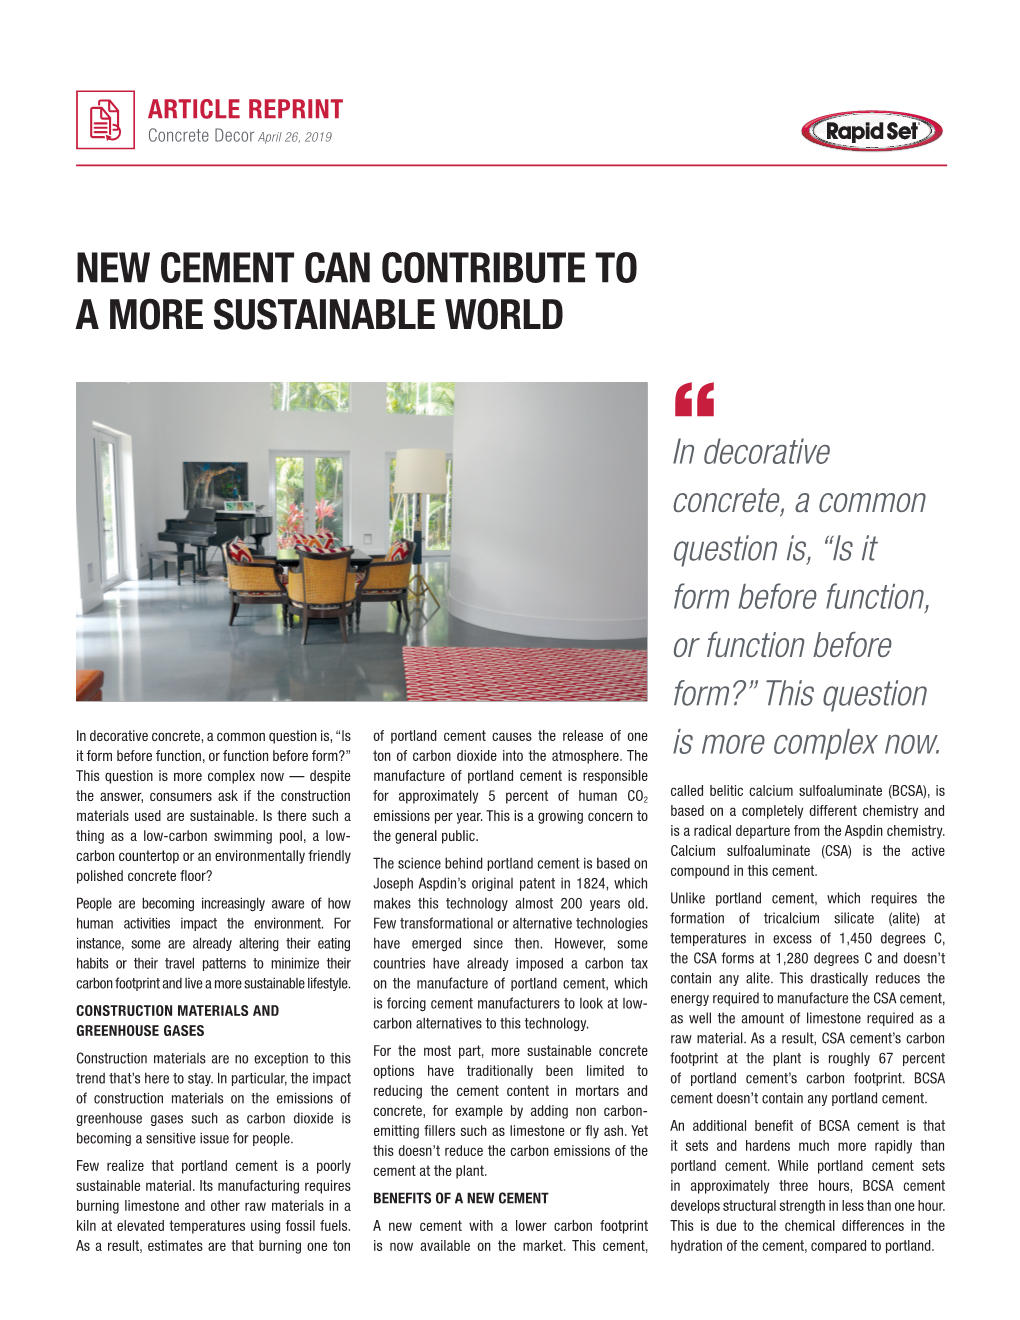 New Cement Can Contribute to a More Sustainable World